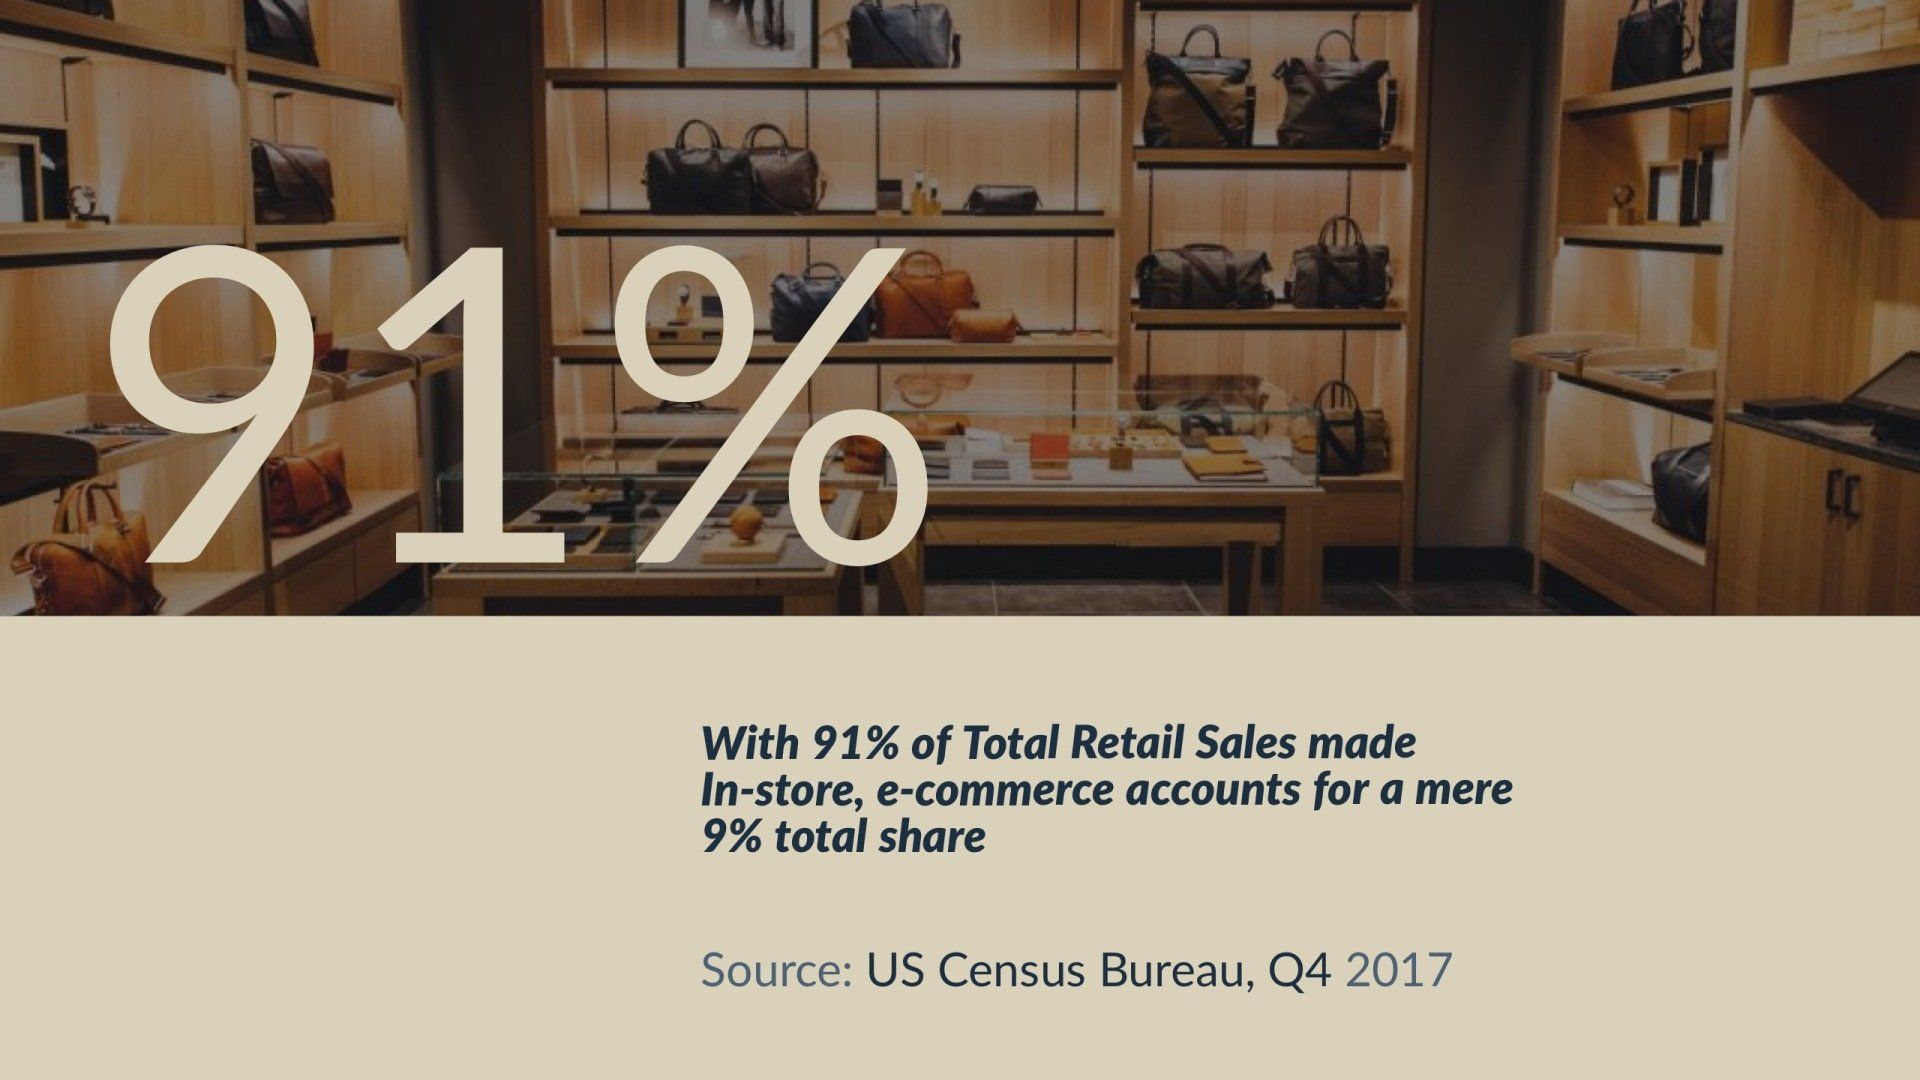 retail report, retail trends, retail sales, in-store shopping, e-commerce share, glw